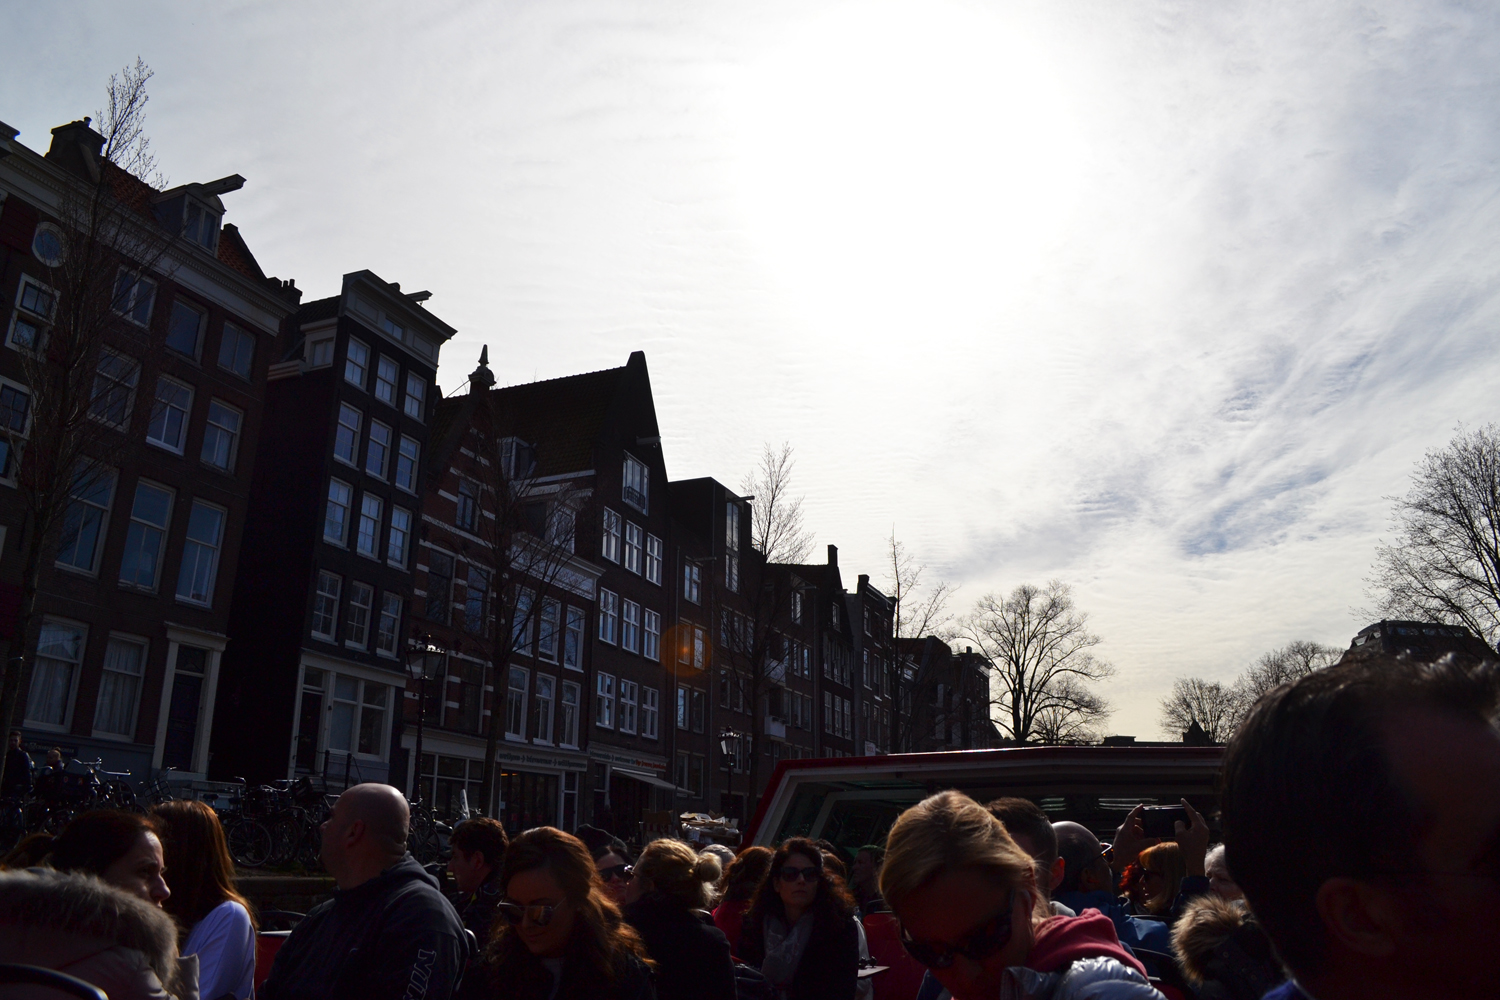 Amsterdam canal tour